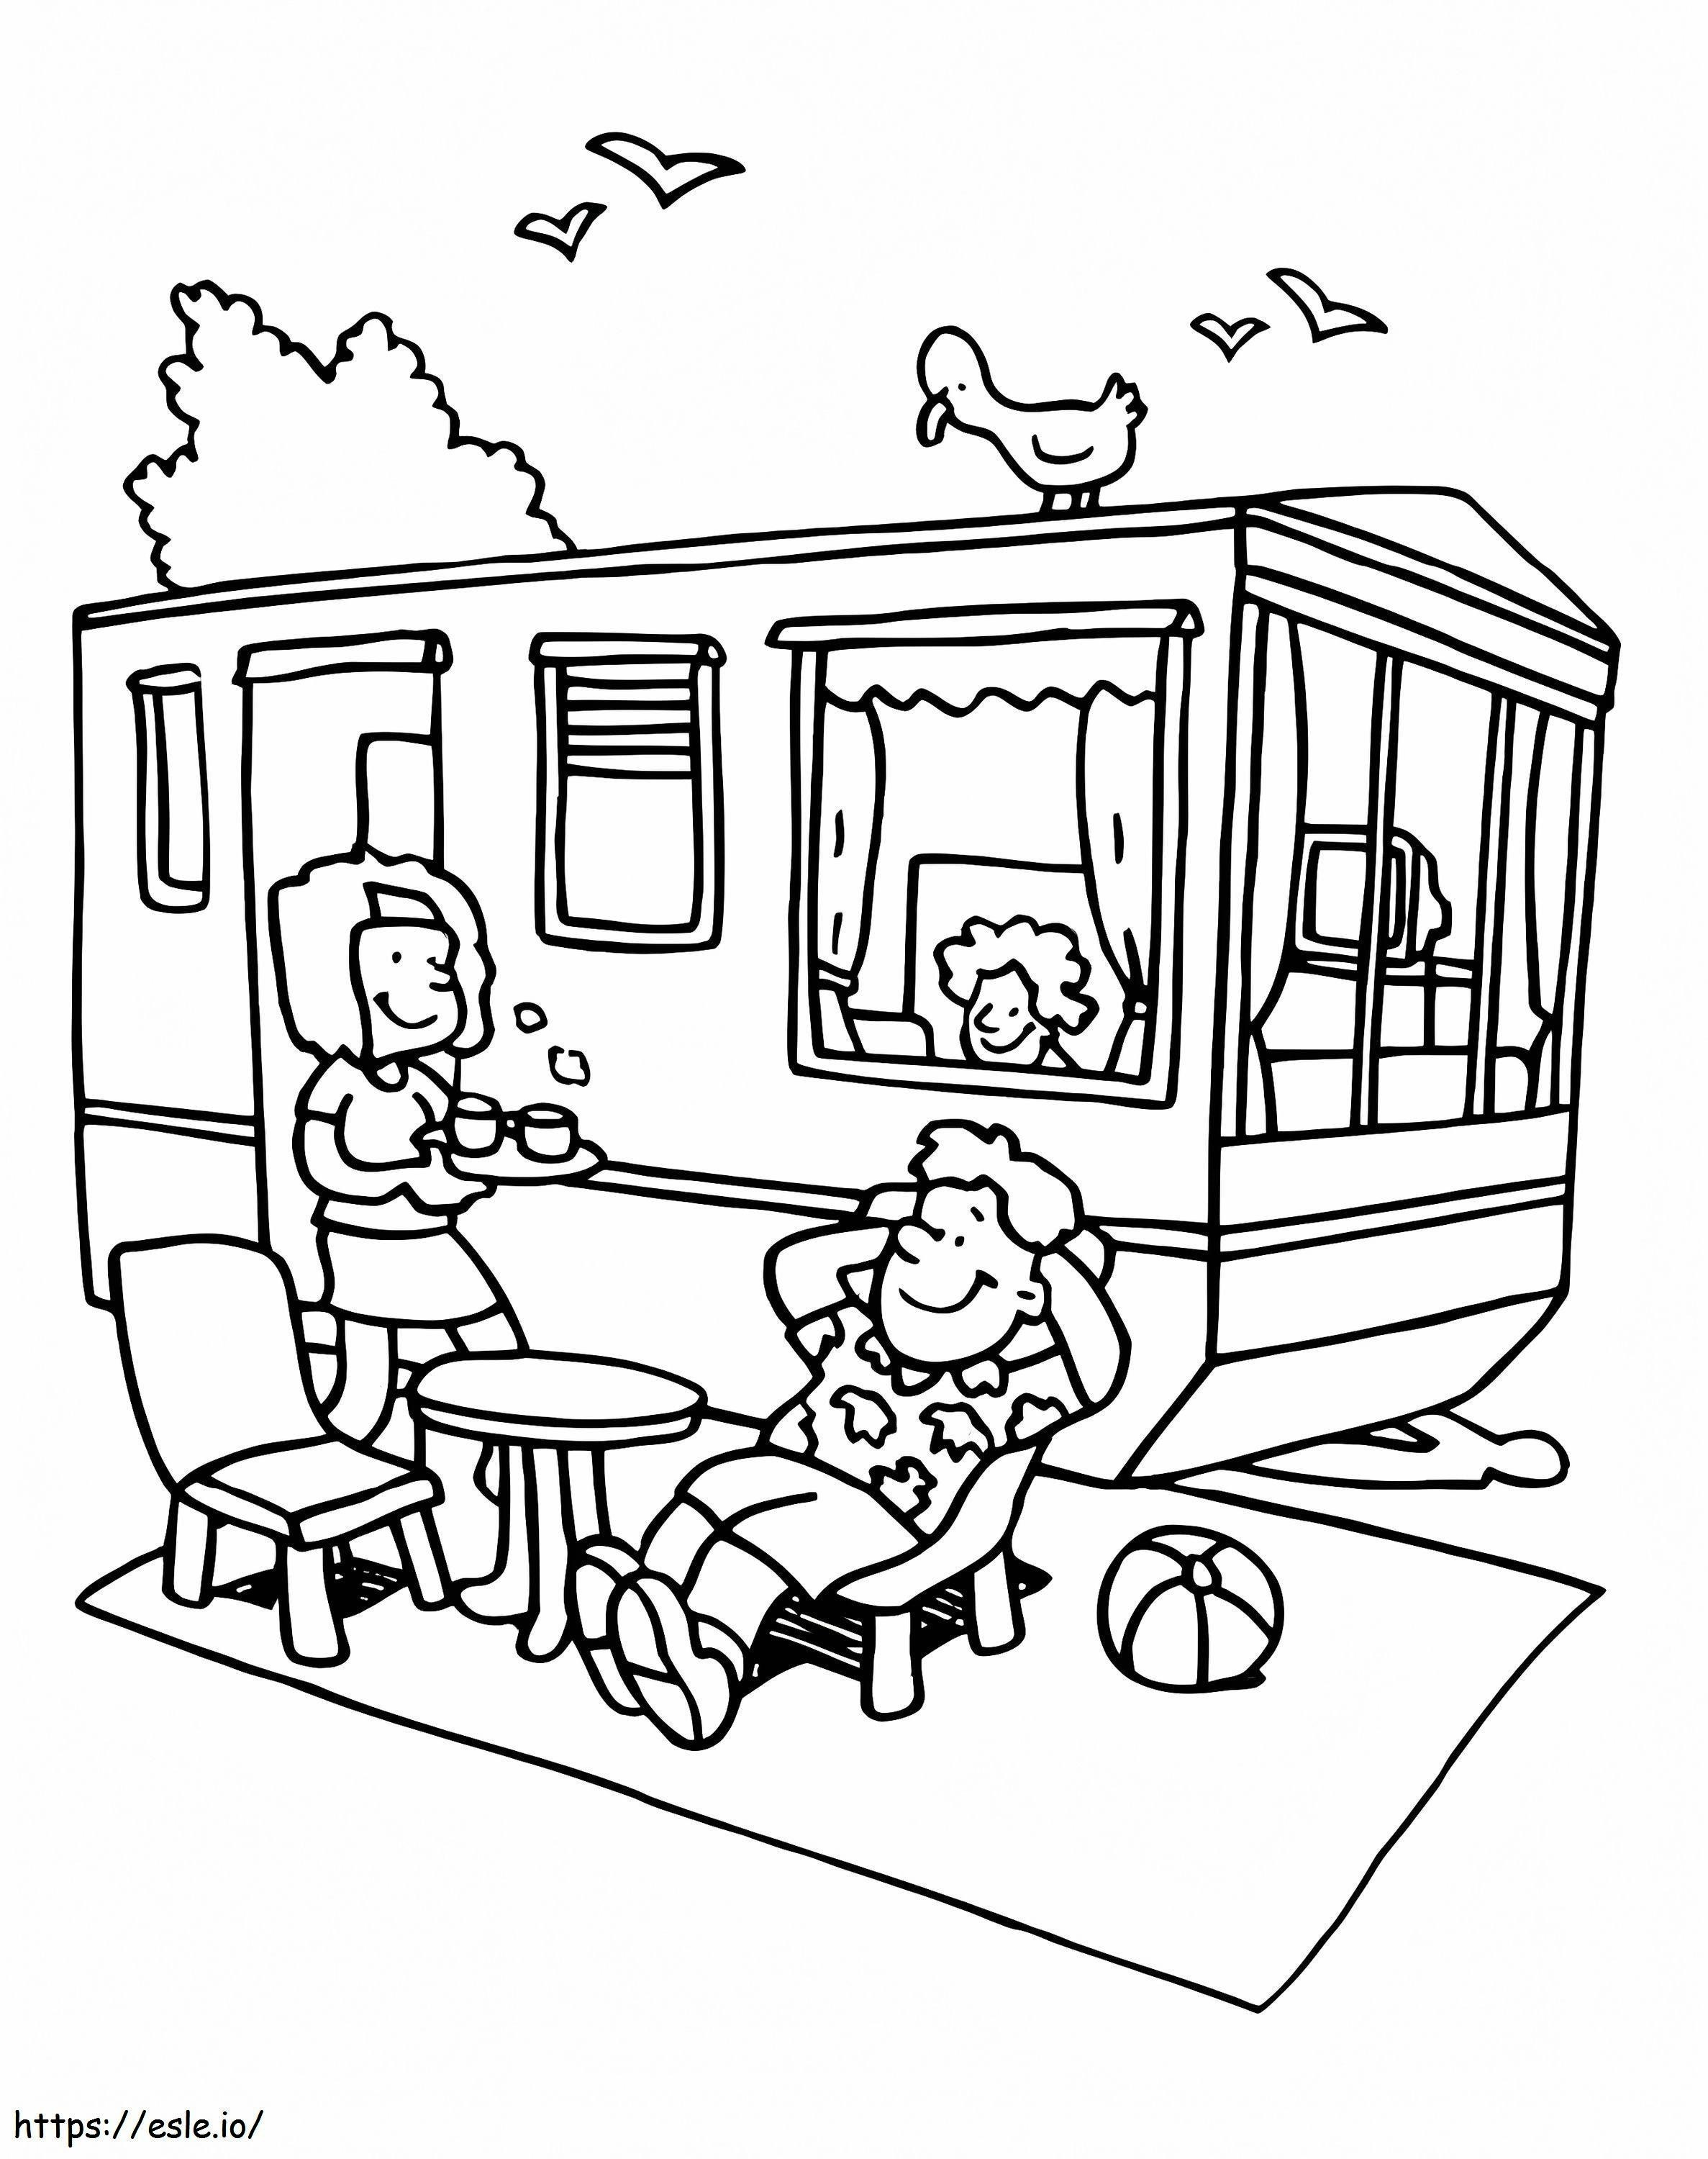 Summer Camping 1 coloring page